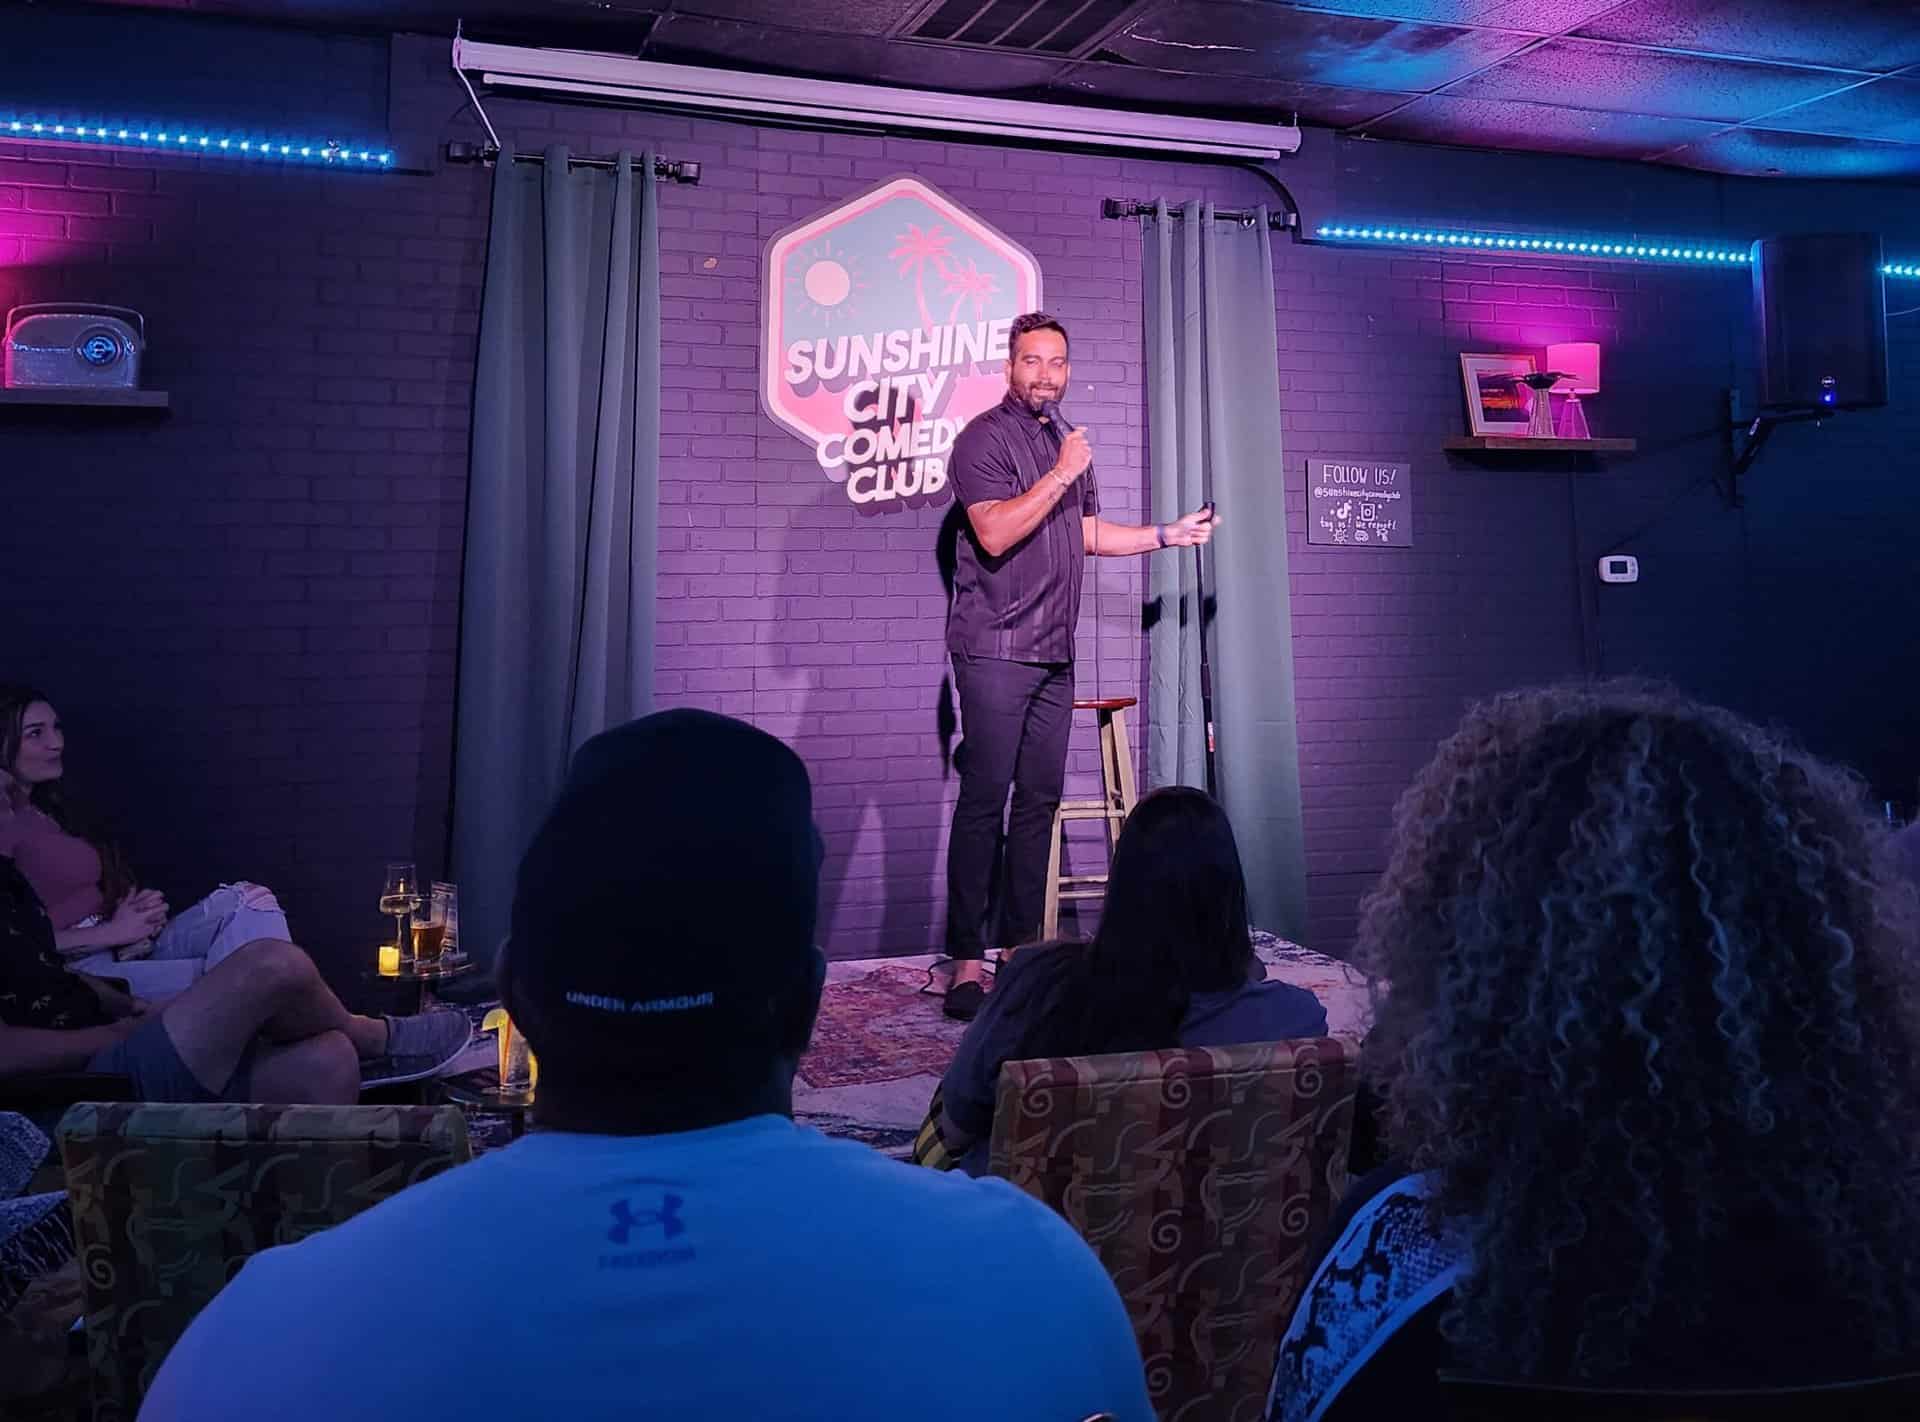 Kenny Garcia on stage at the Sunshine City Comedy Club